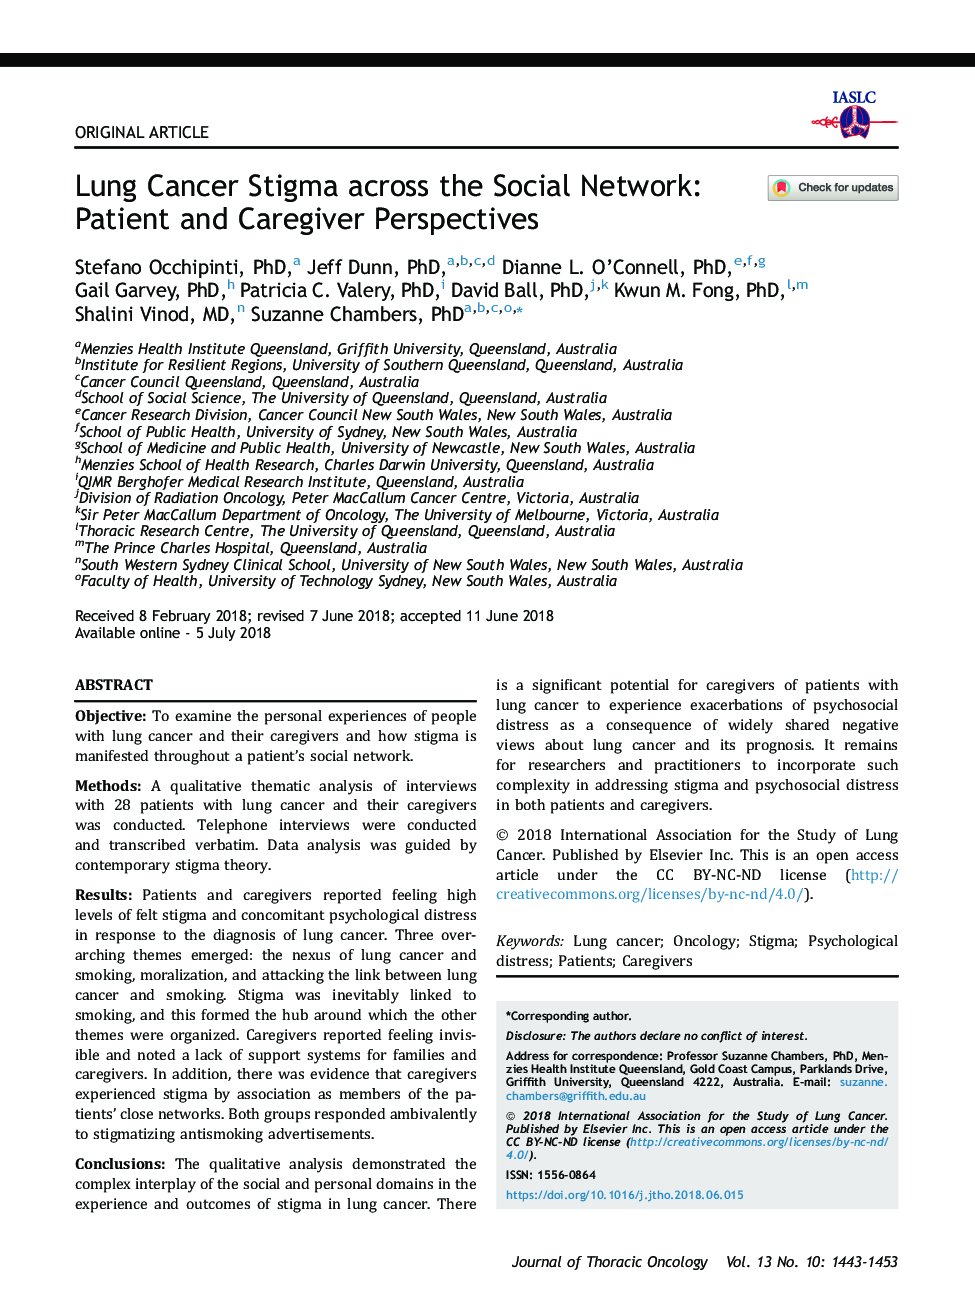 Lung Cancer Stigma across the Social Network: Patient and Caregiver Perspectives